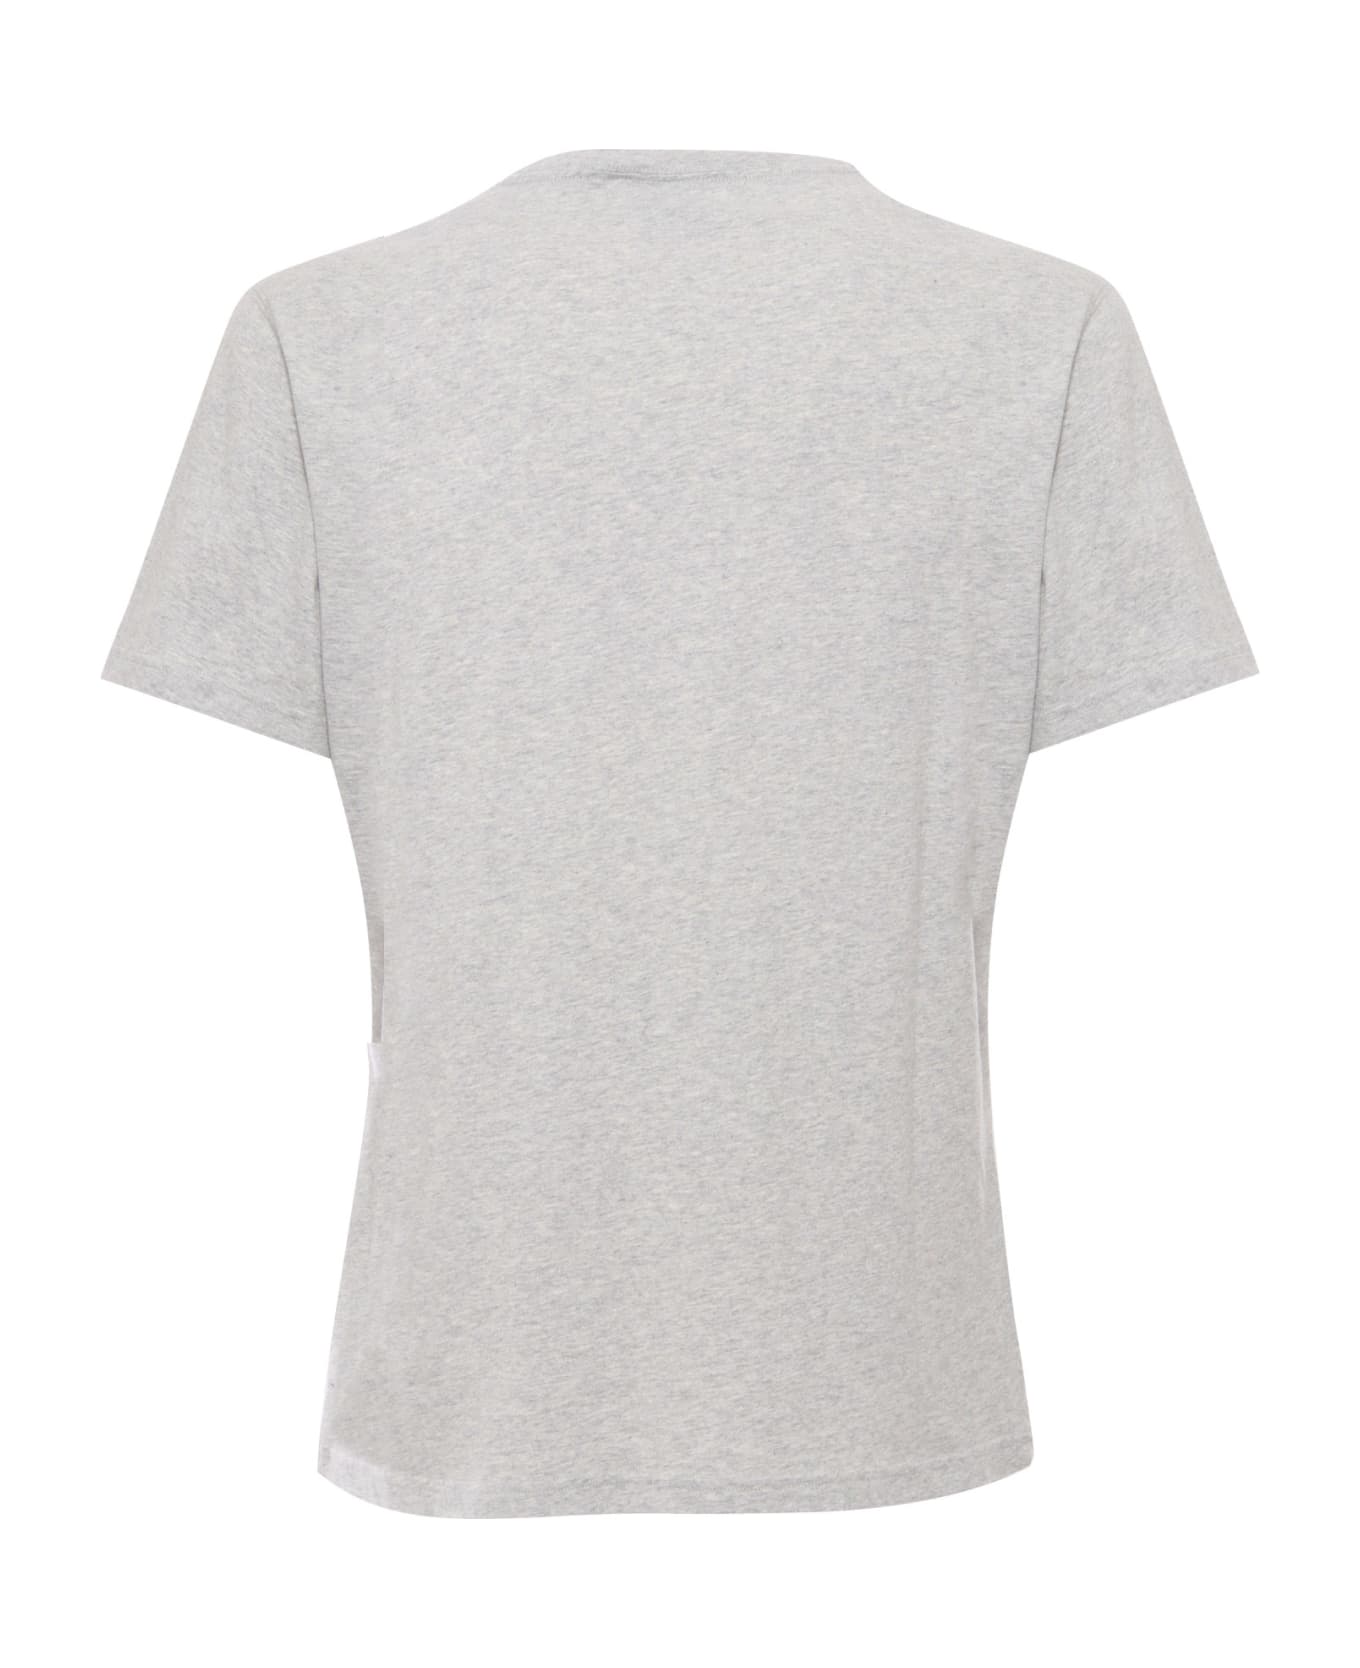 Barbour Grey Patterned T-shirt - GREY